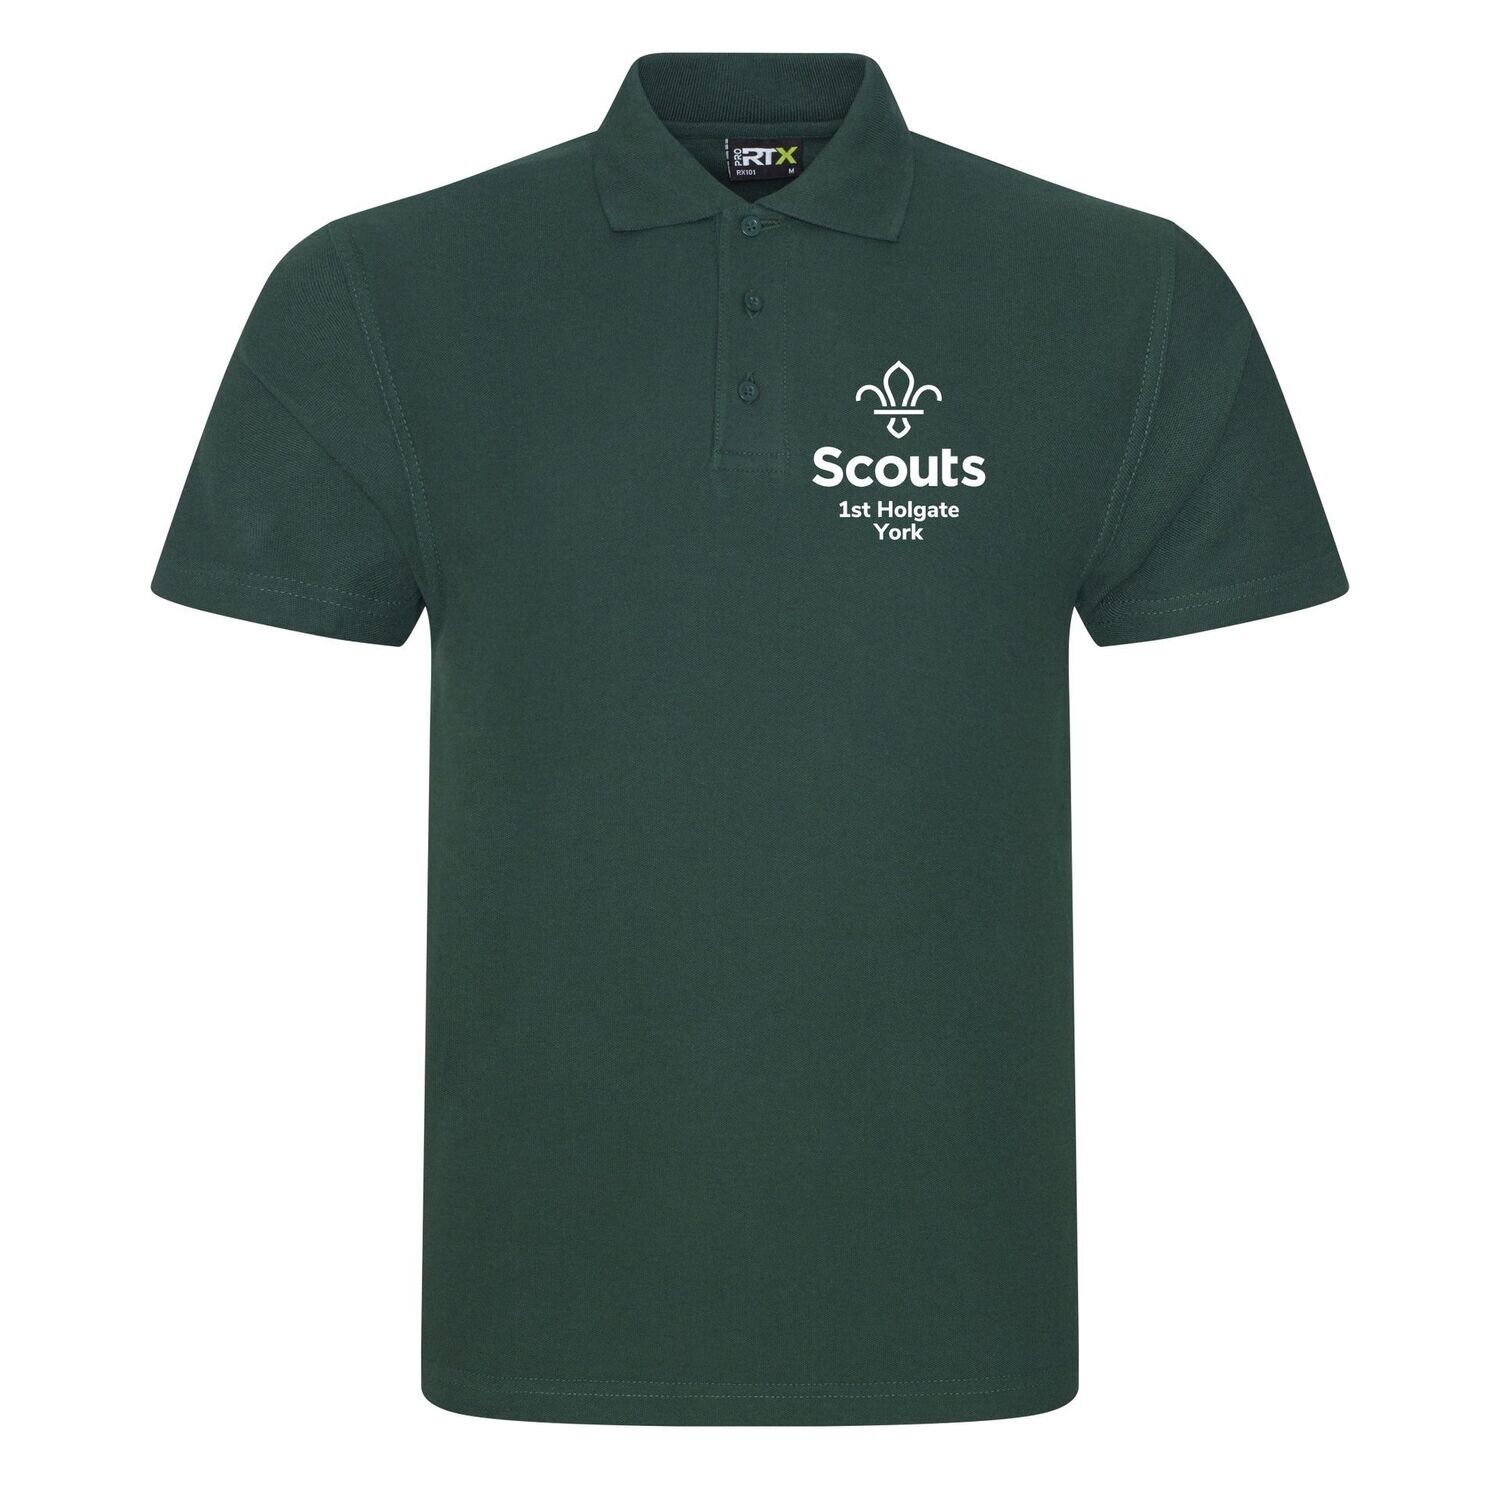 SS402 First Holgate York Scouts - Adults Bottle Green Polo